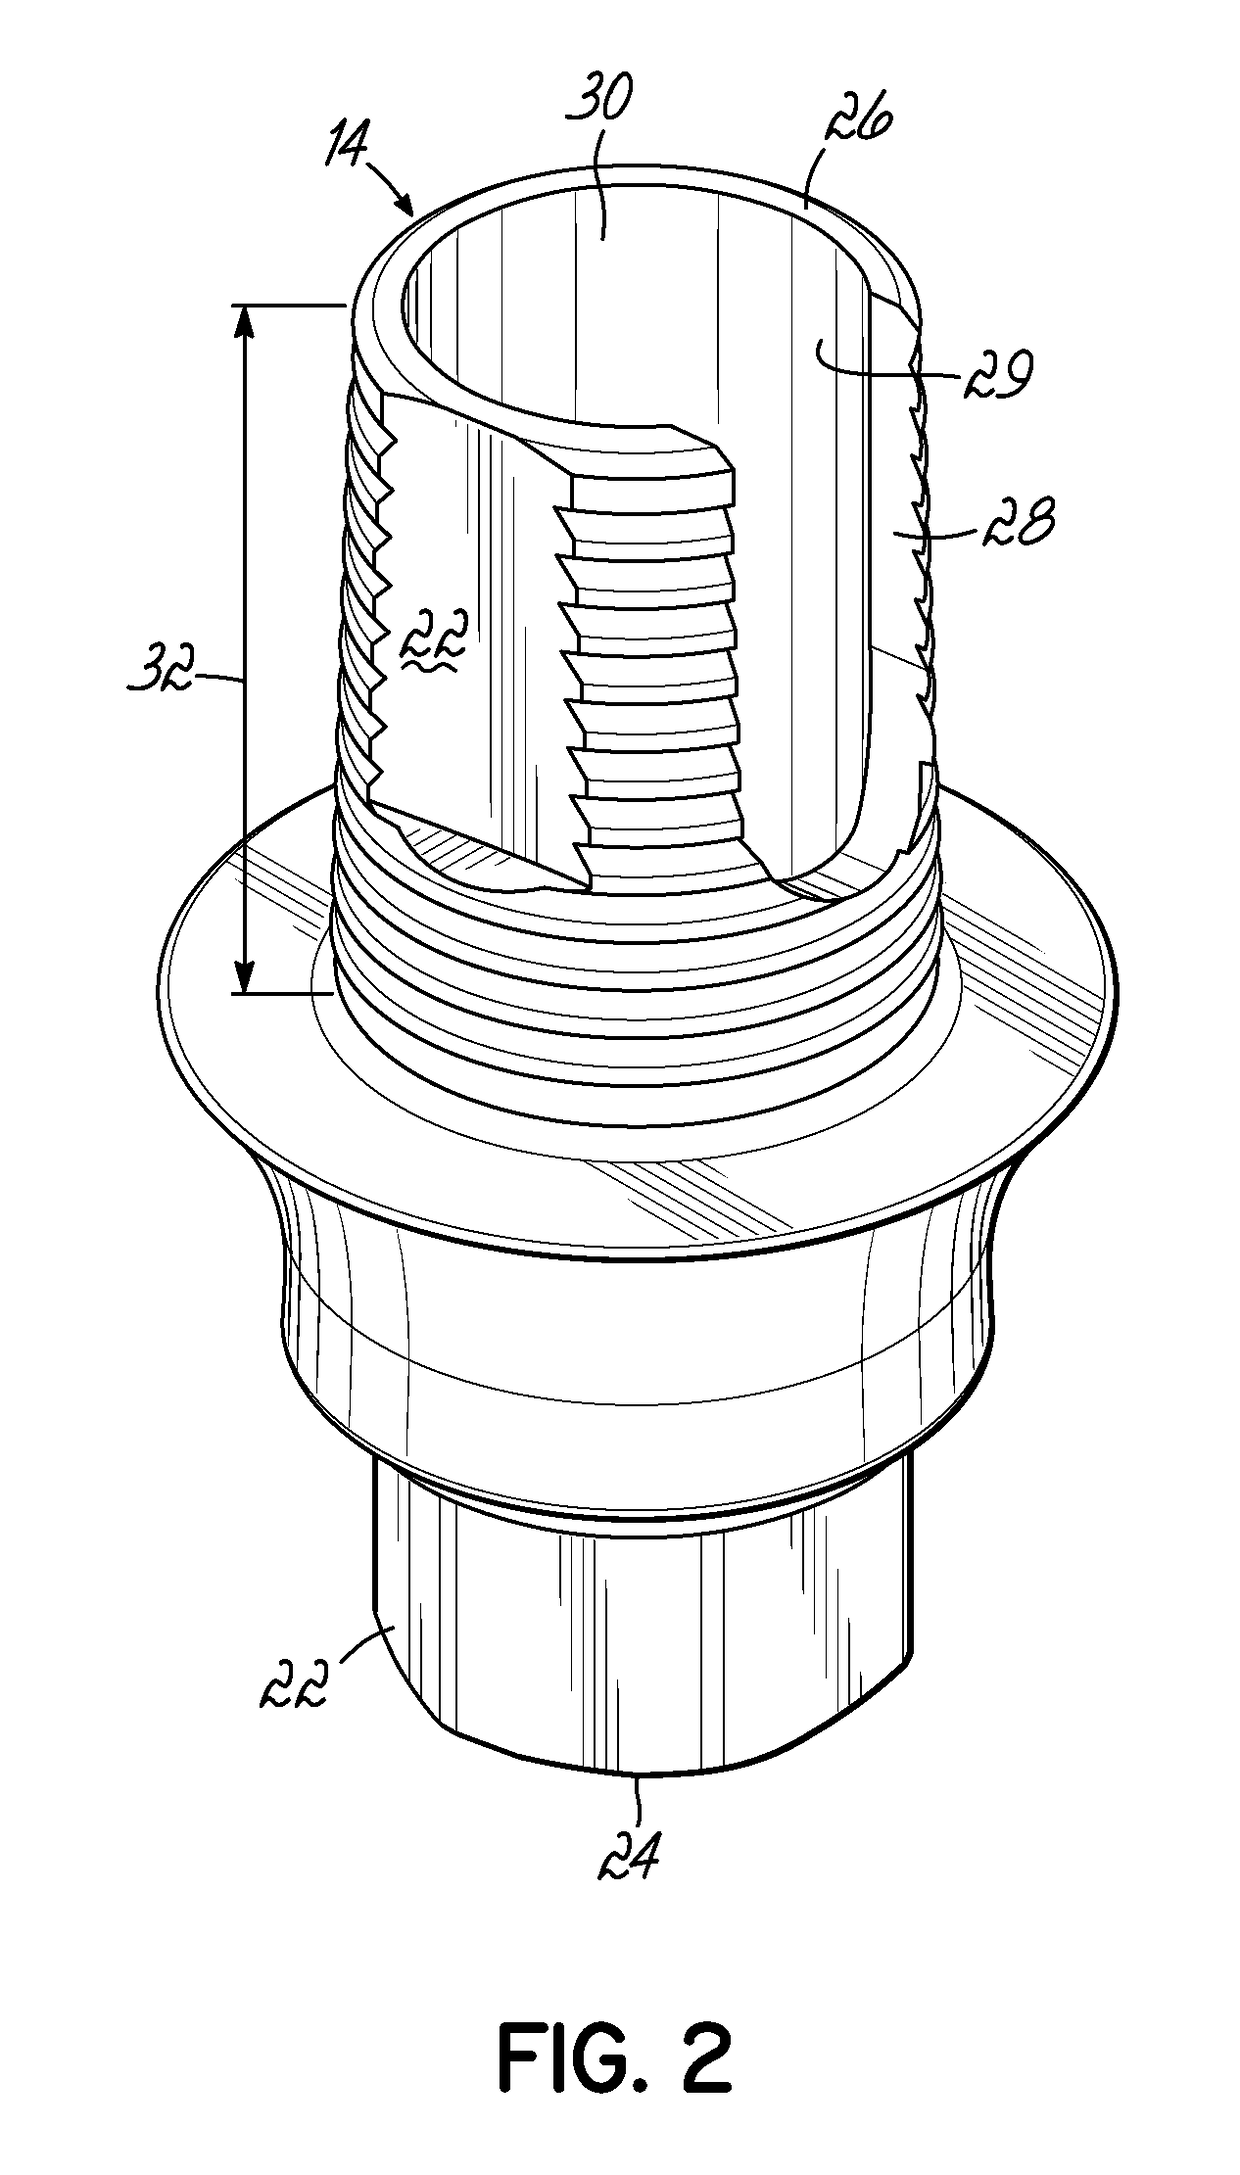 Screw-retained abutment with off-axis feature and methods of making and using same